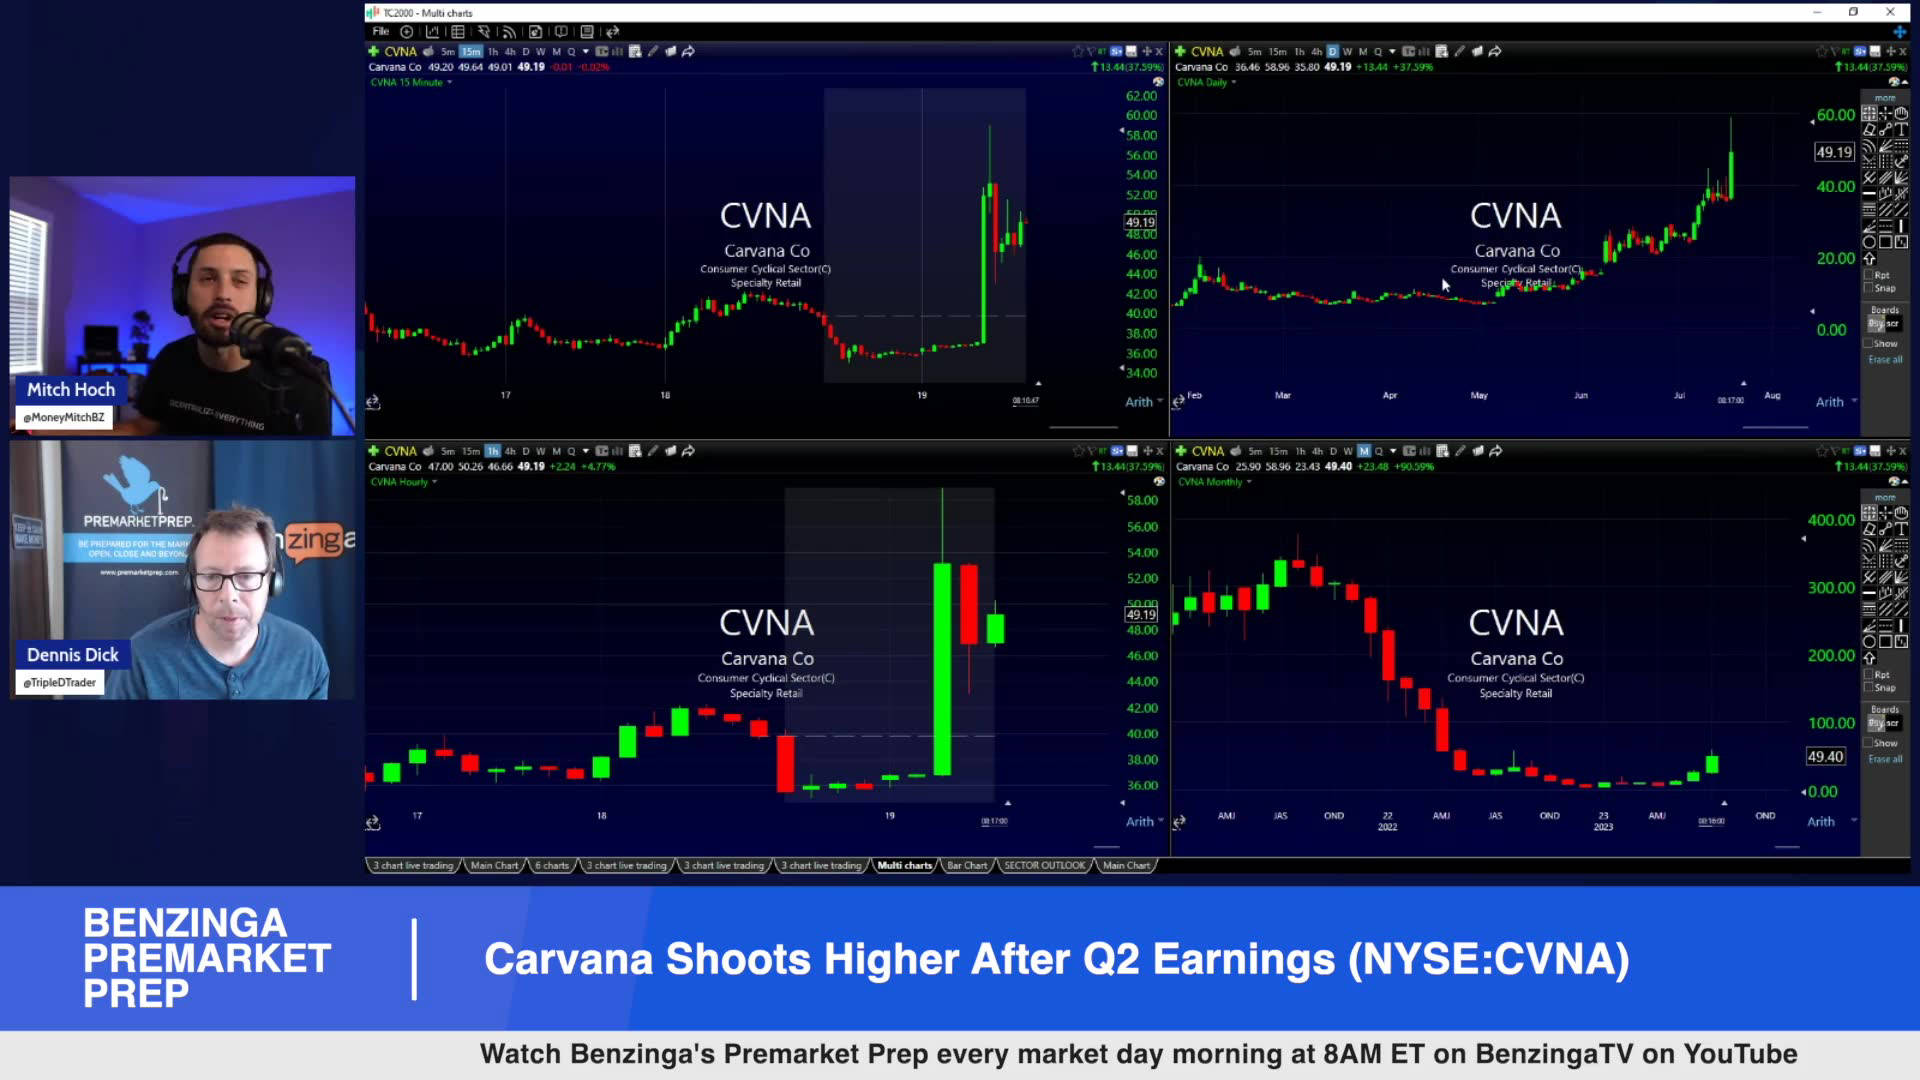 Carvana Shoots Higher After Q2 Earnings Here's Why